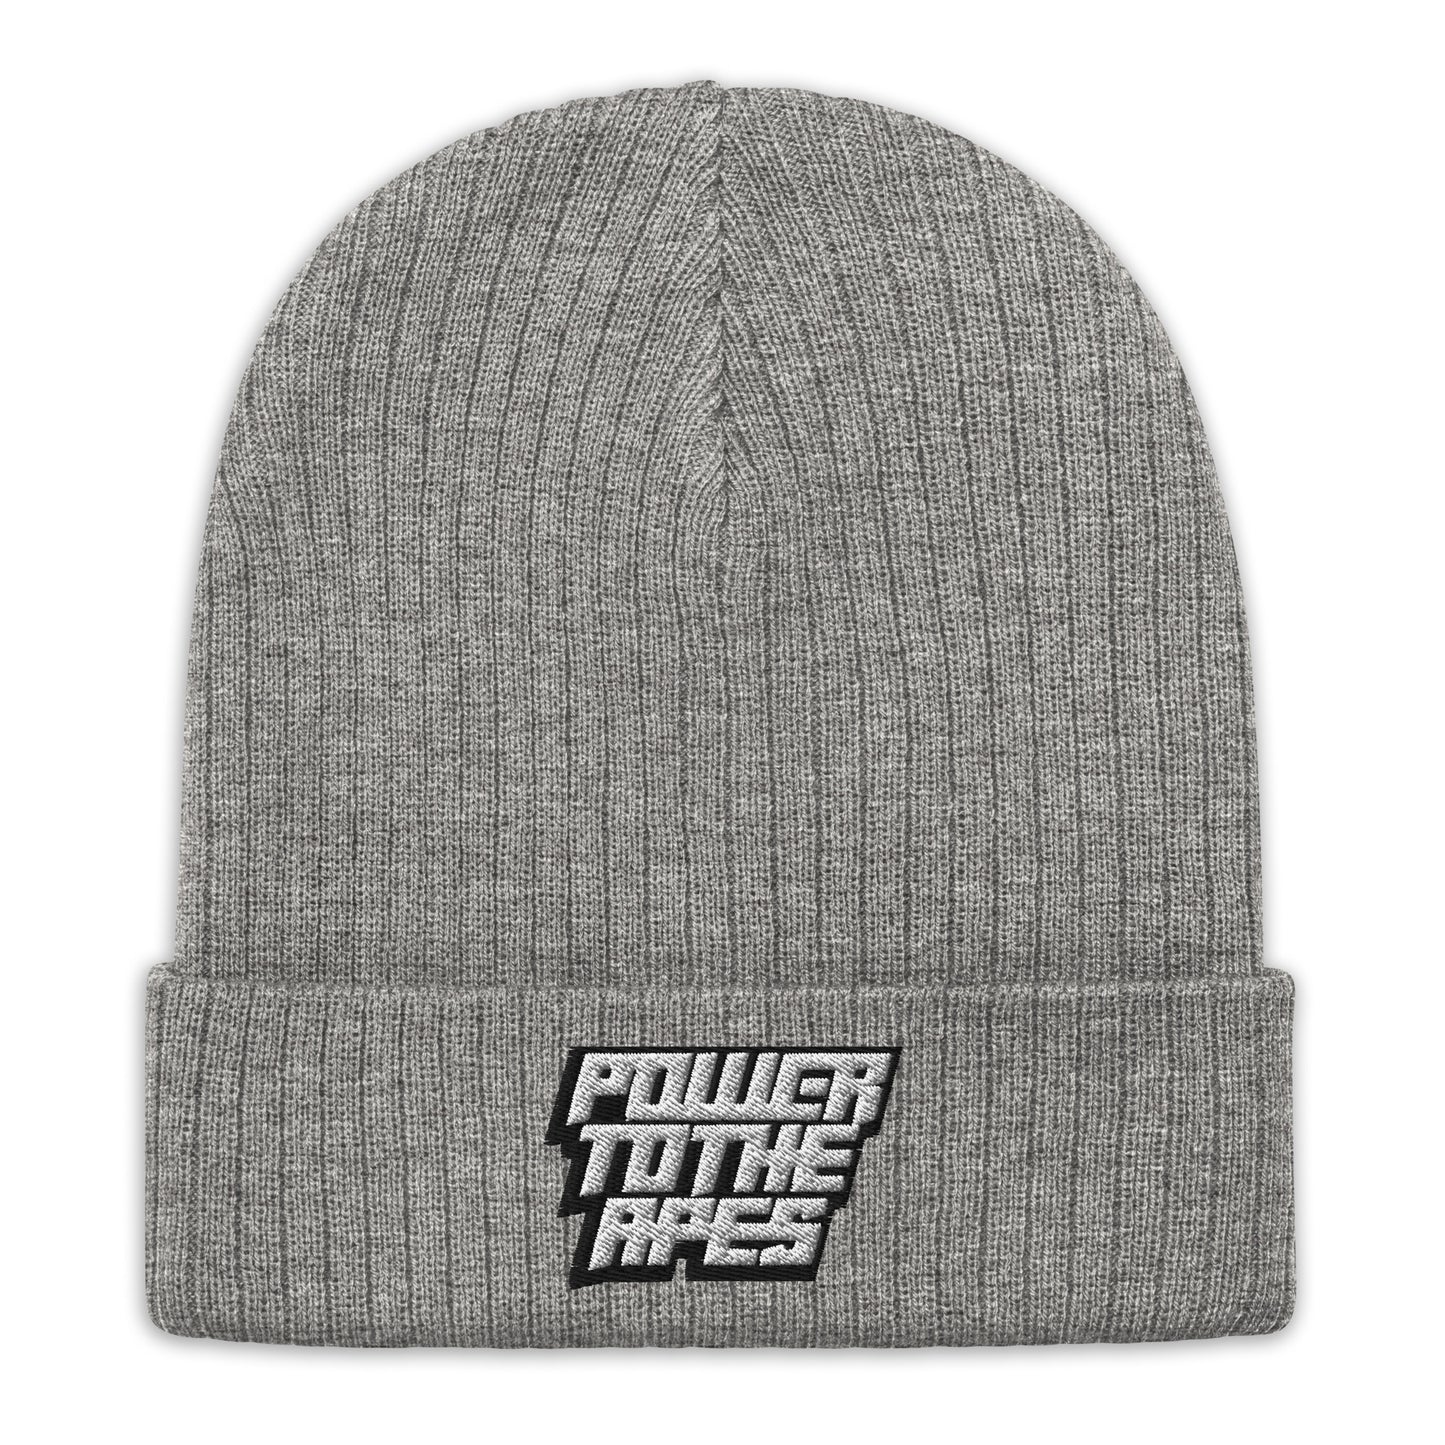 Power to the apes Ribbed knit beanie